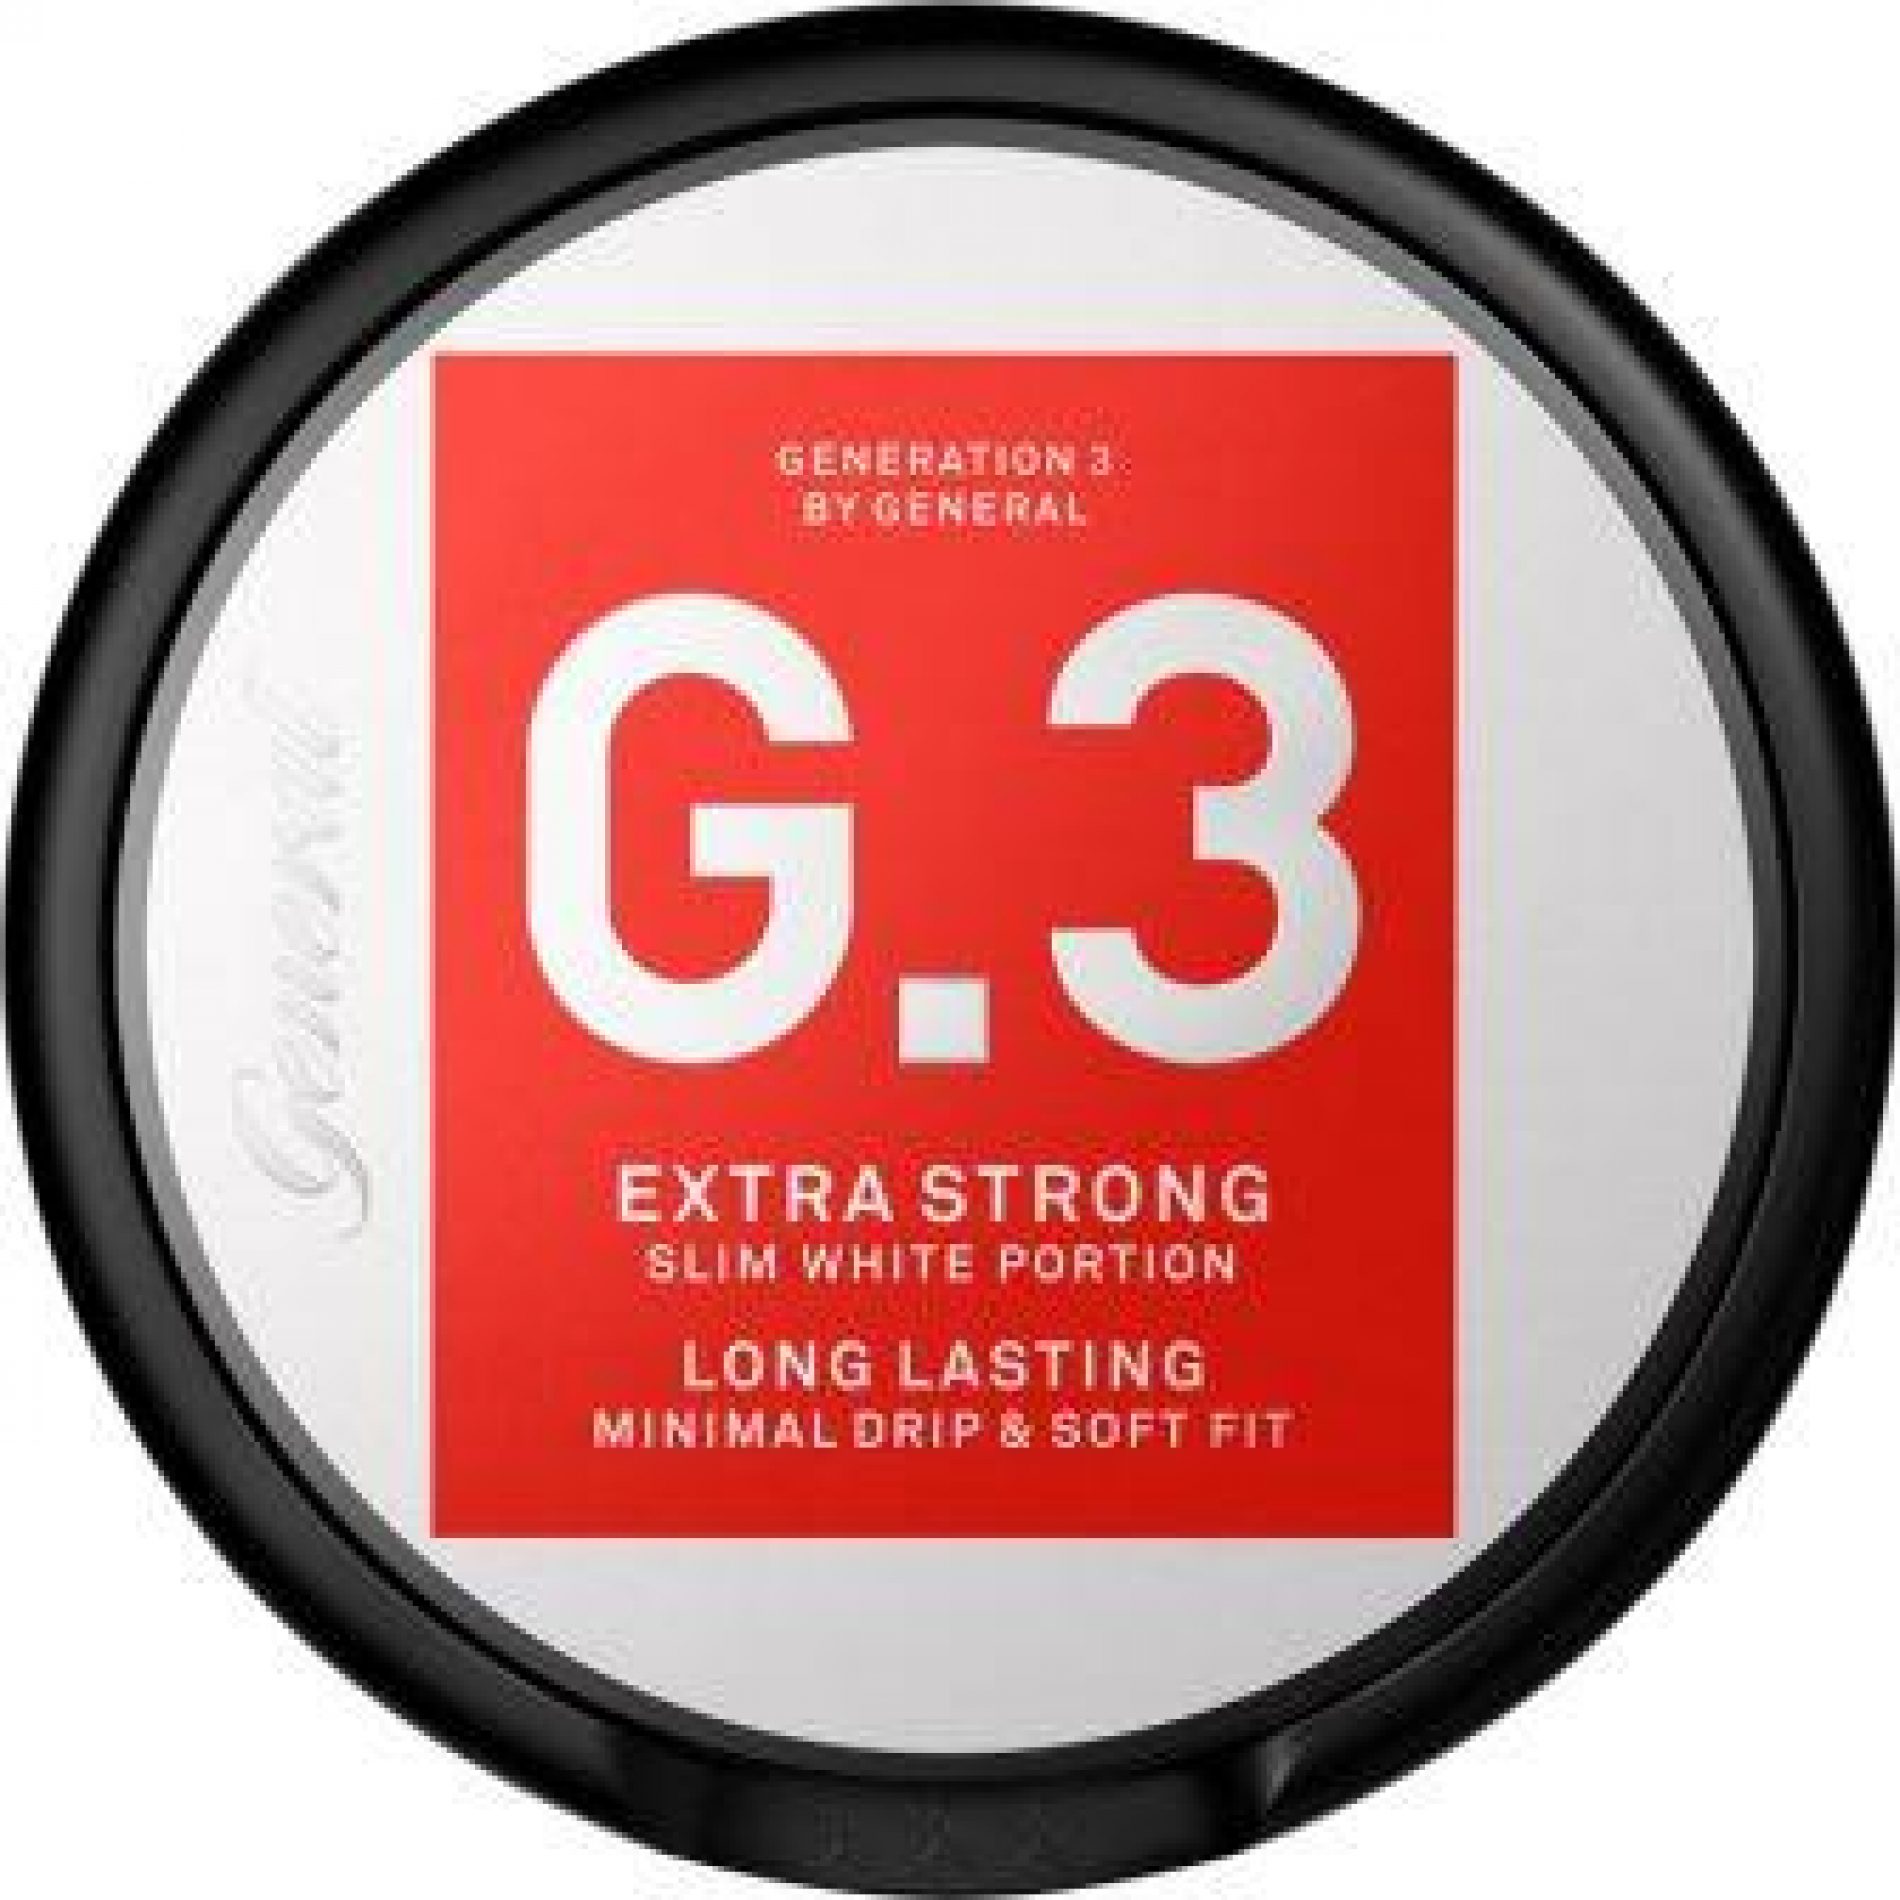 Snus Review:  General G.3 Slim White Extra Strong Portion Snus